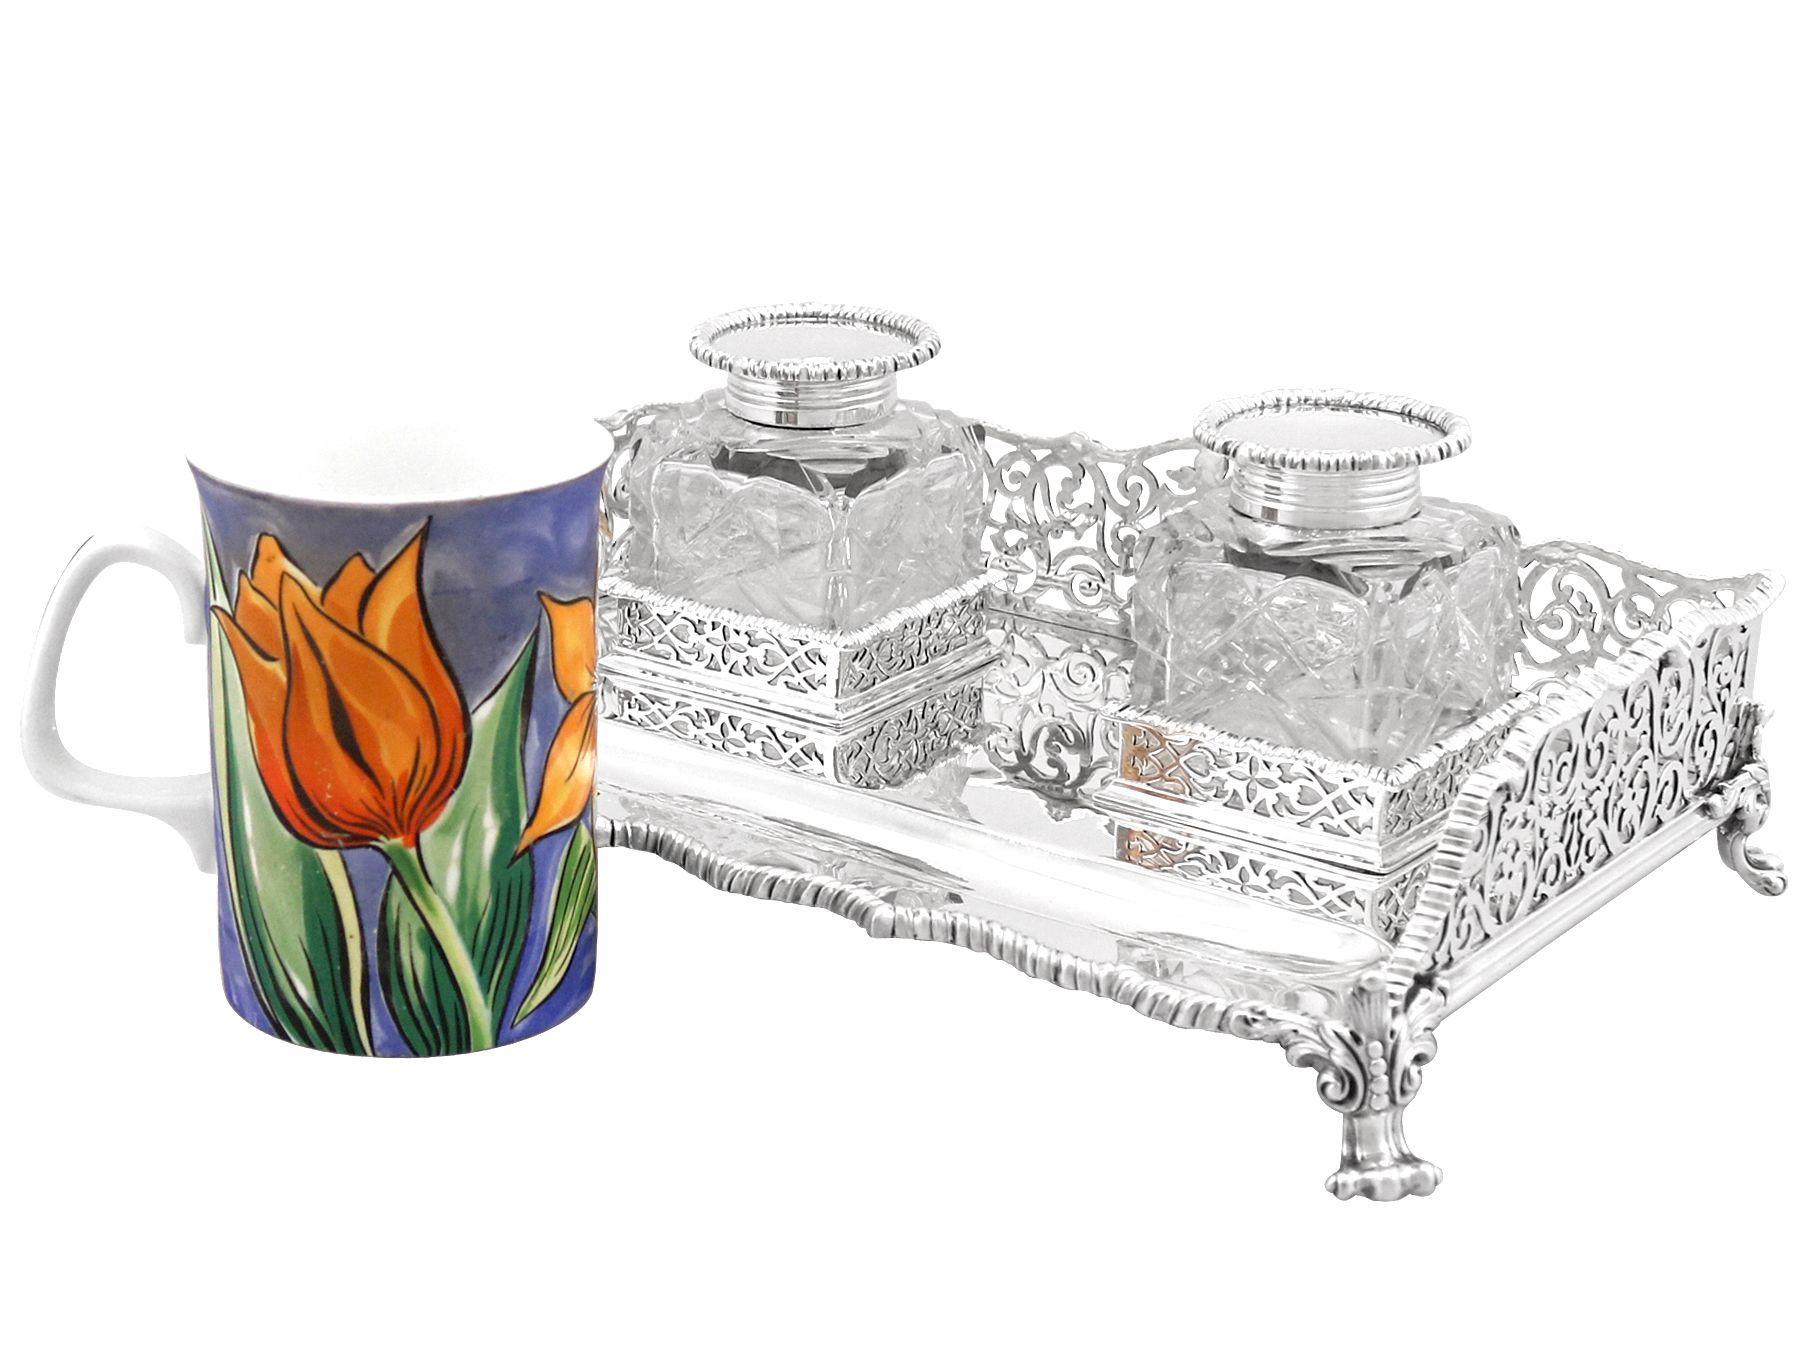 An exceptional, fine and impressive antique Edwardian English sterling silver gallery inkstand made by Edward Barnard & Sons Ltd an addition to our ornamental silverware collection.

This exceptional antique Edwardian sterling silver desk